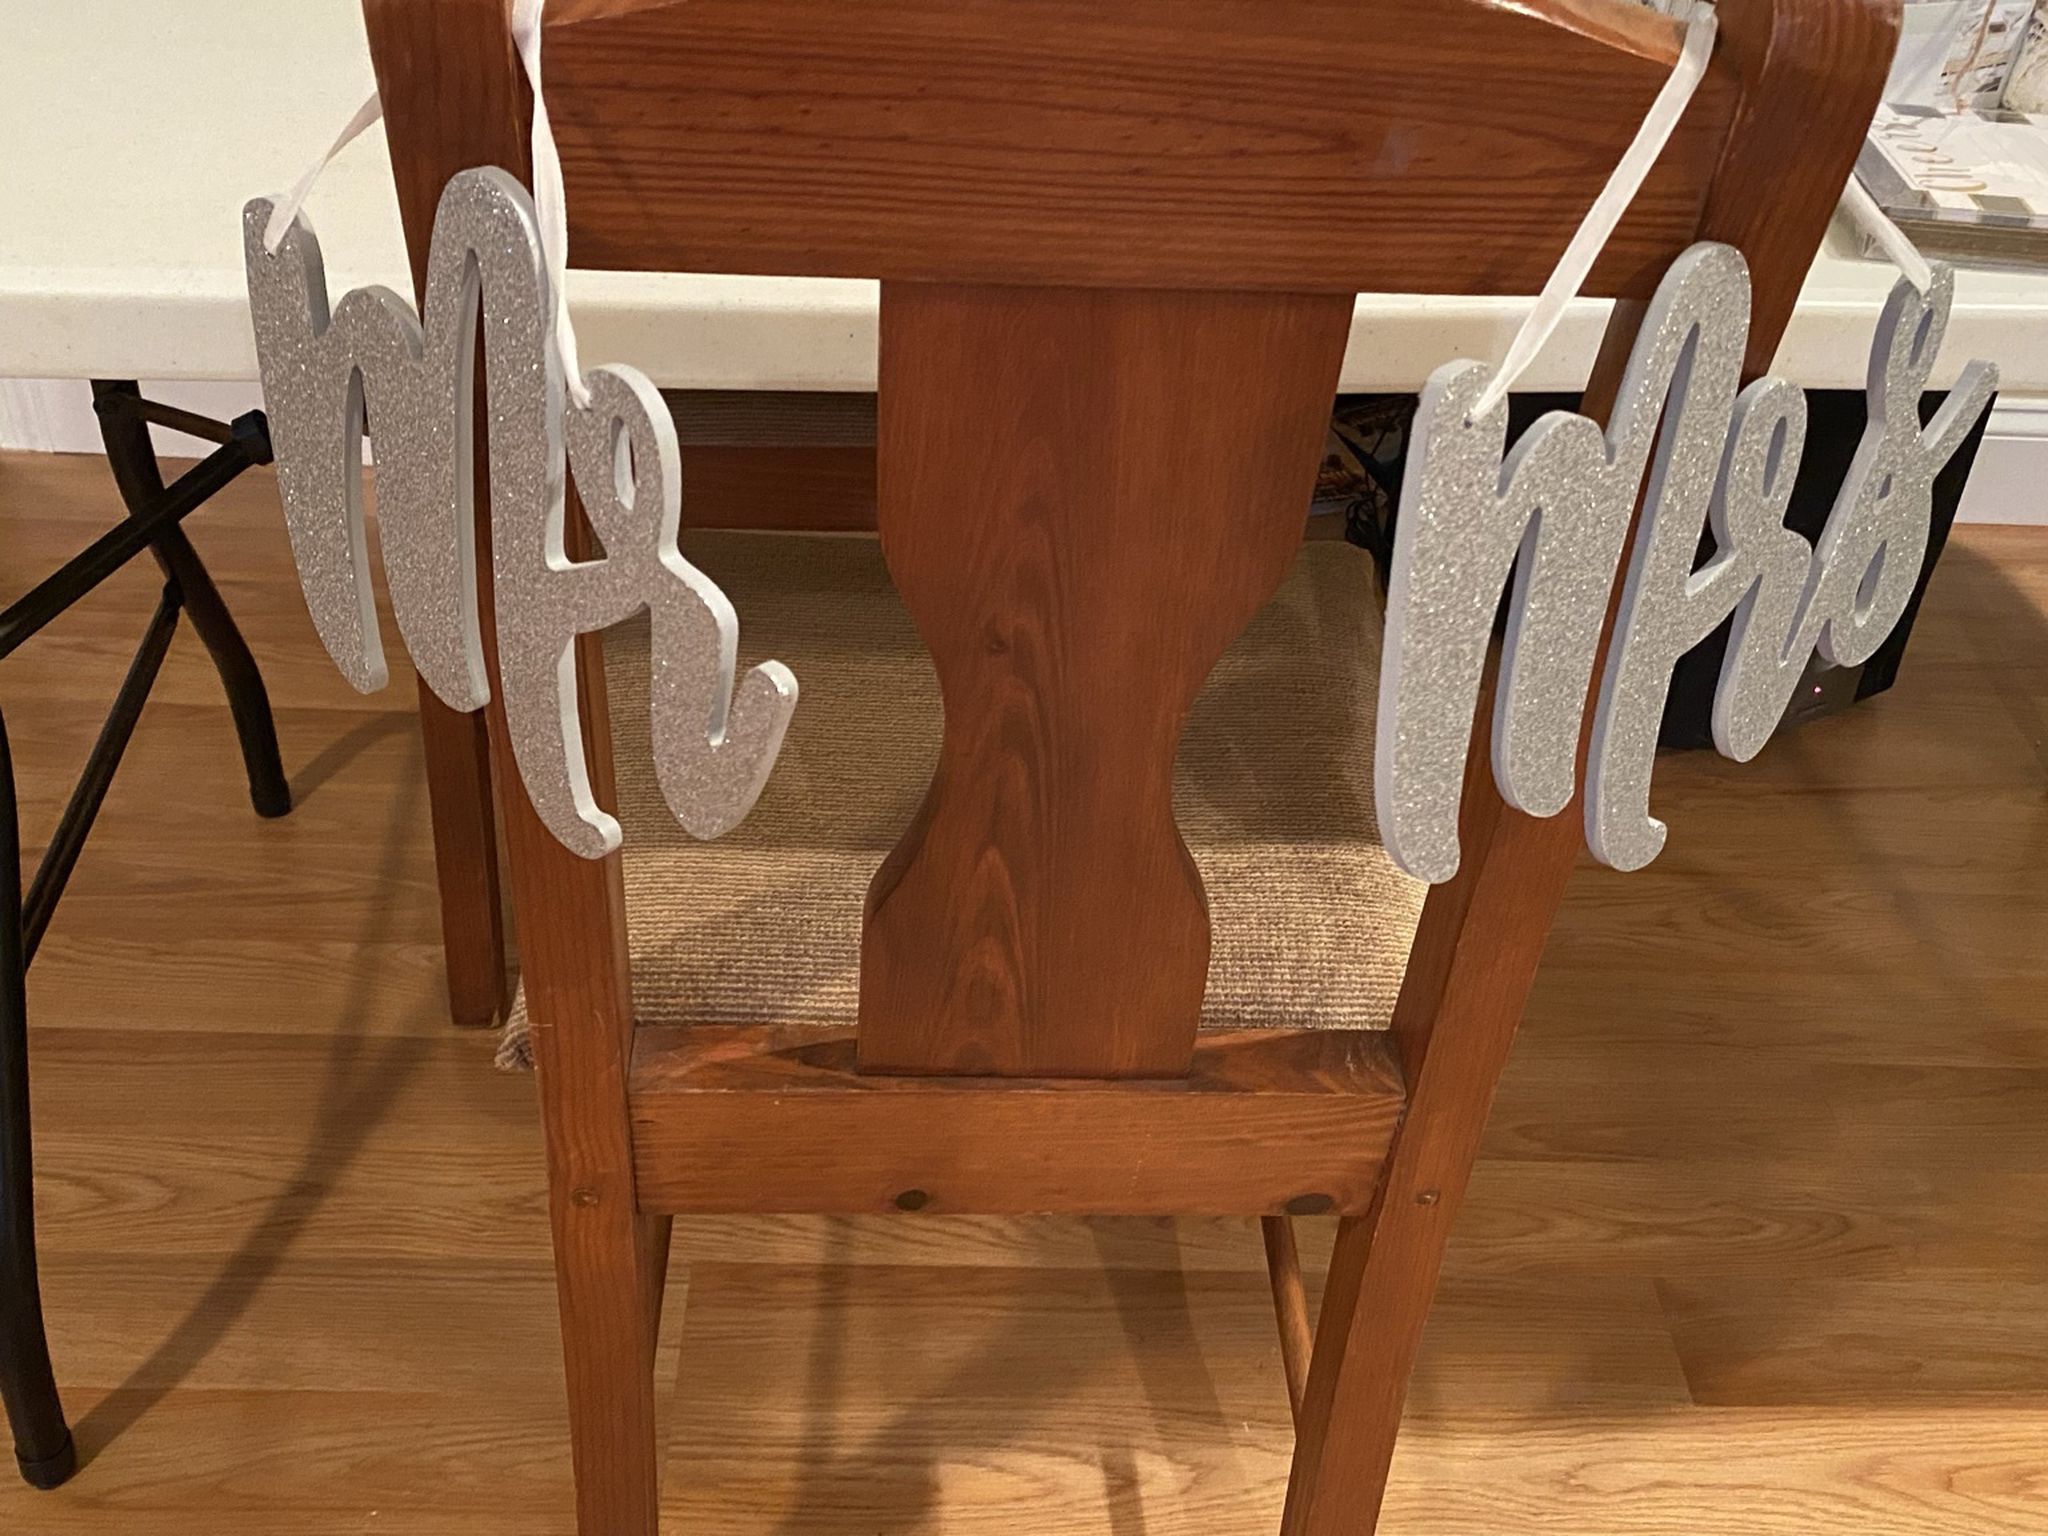 Mr/Mrs Chair Signs